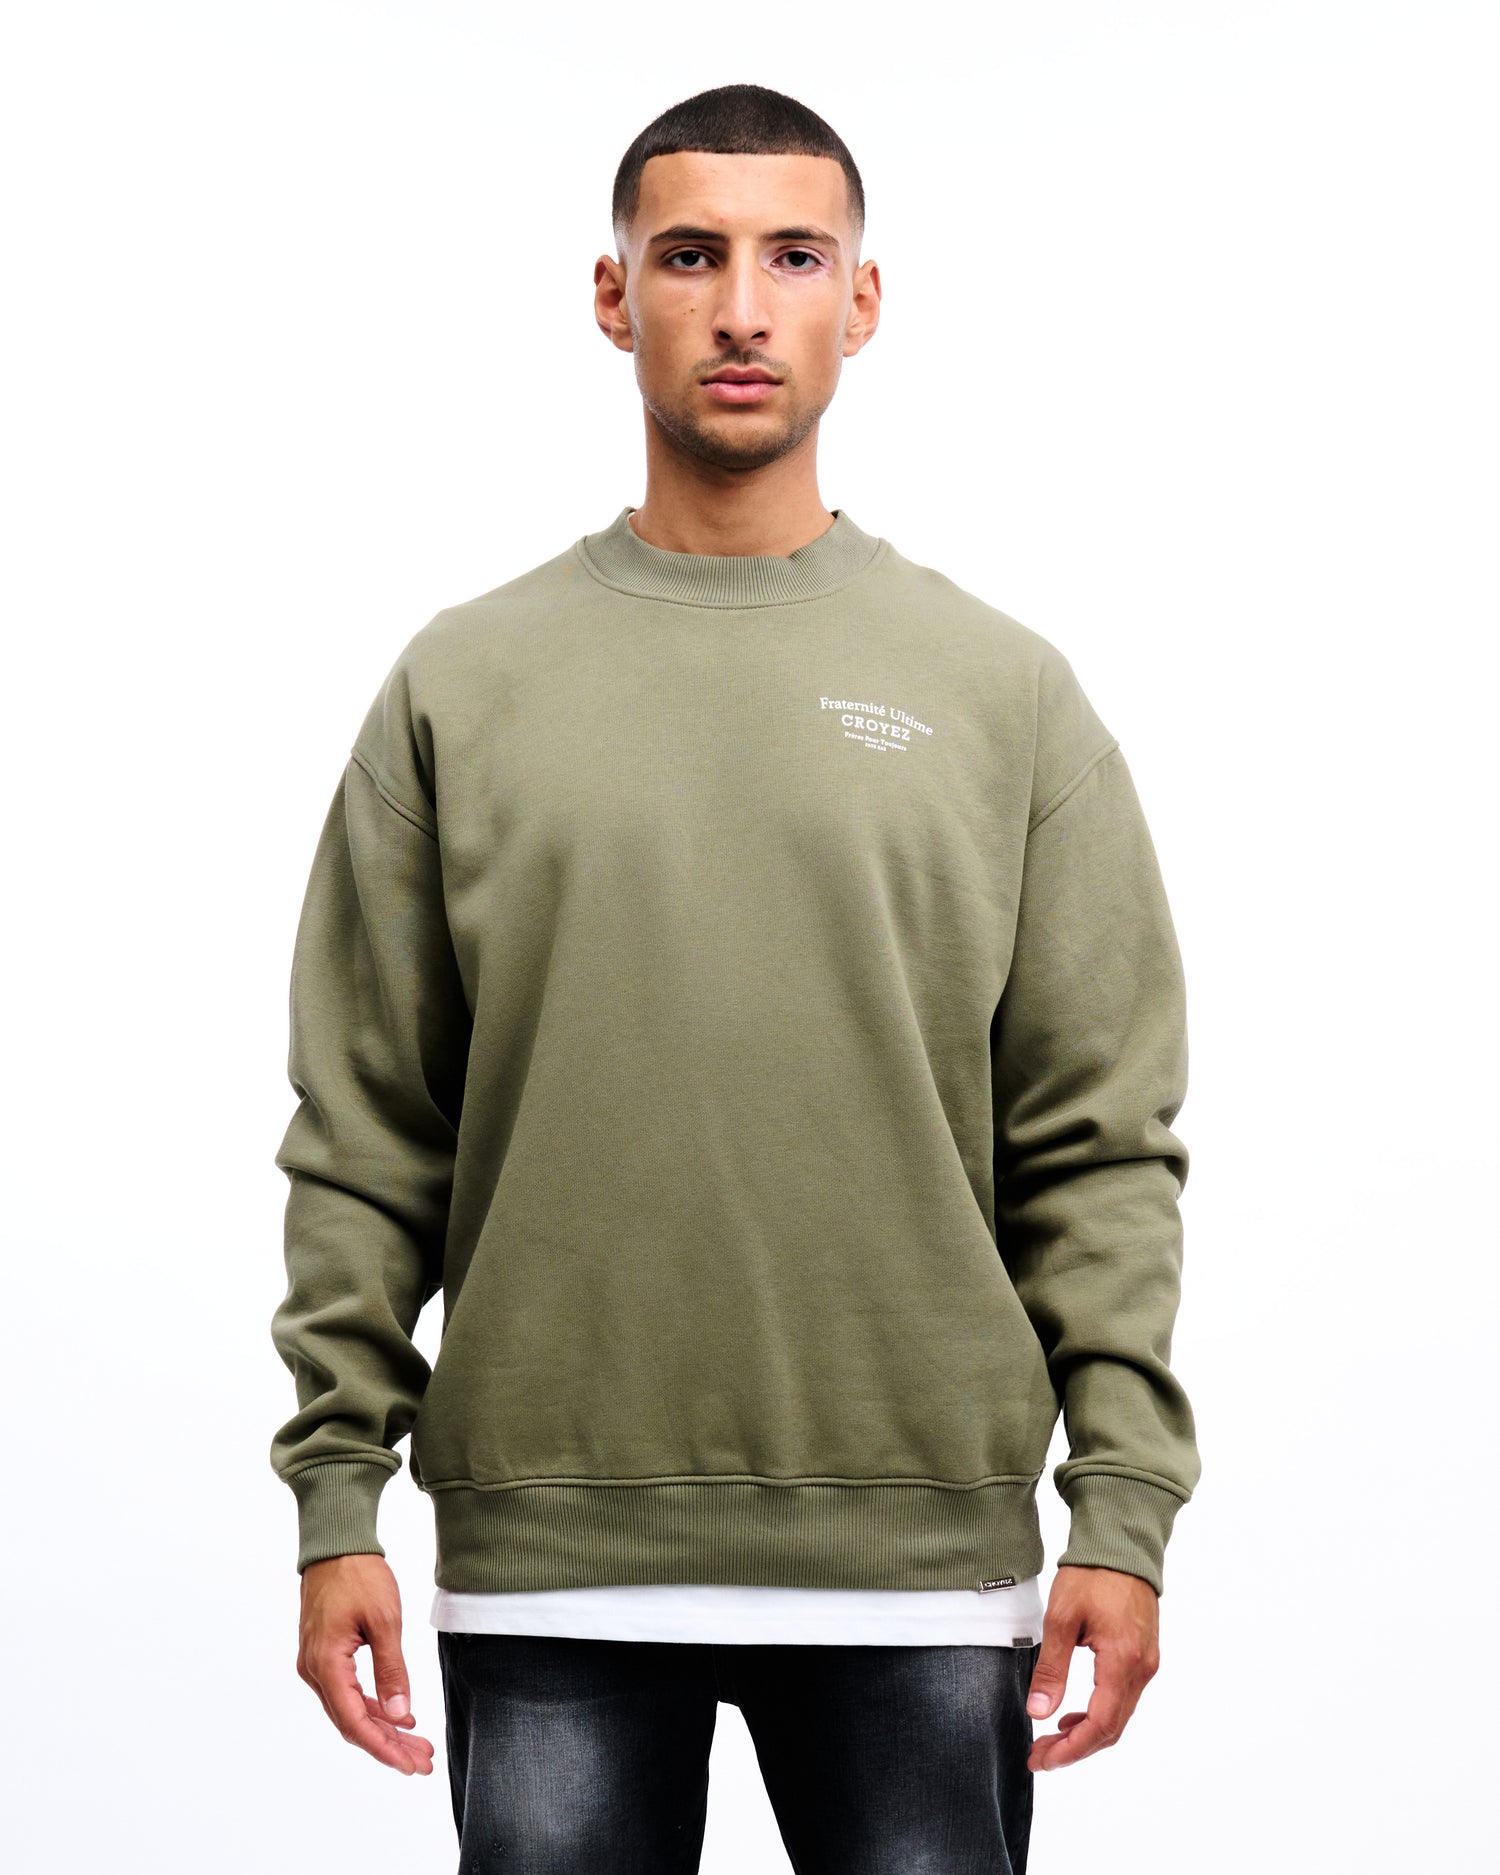 CROYEZ FRATERNITÉ SWEATER - OLIVE/WHITE